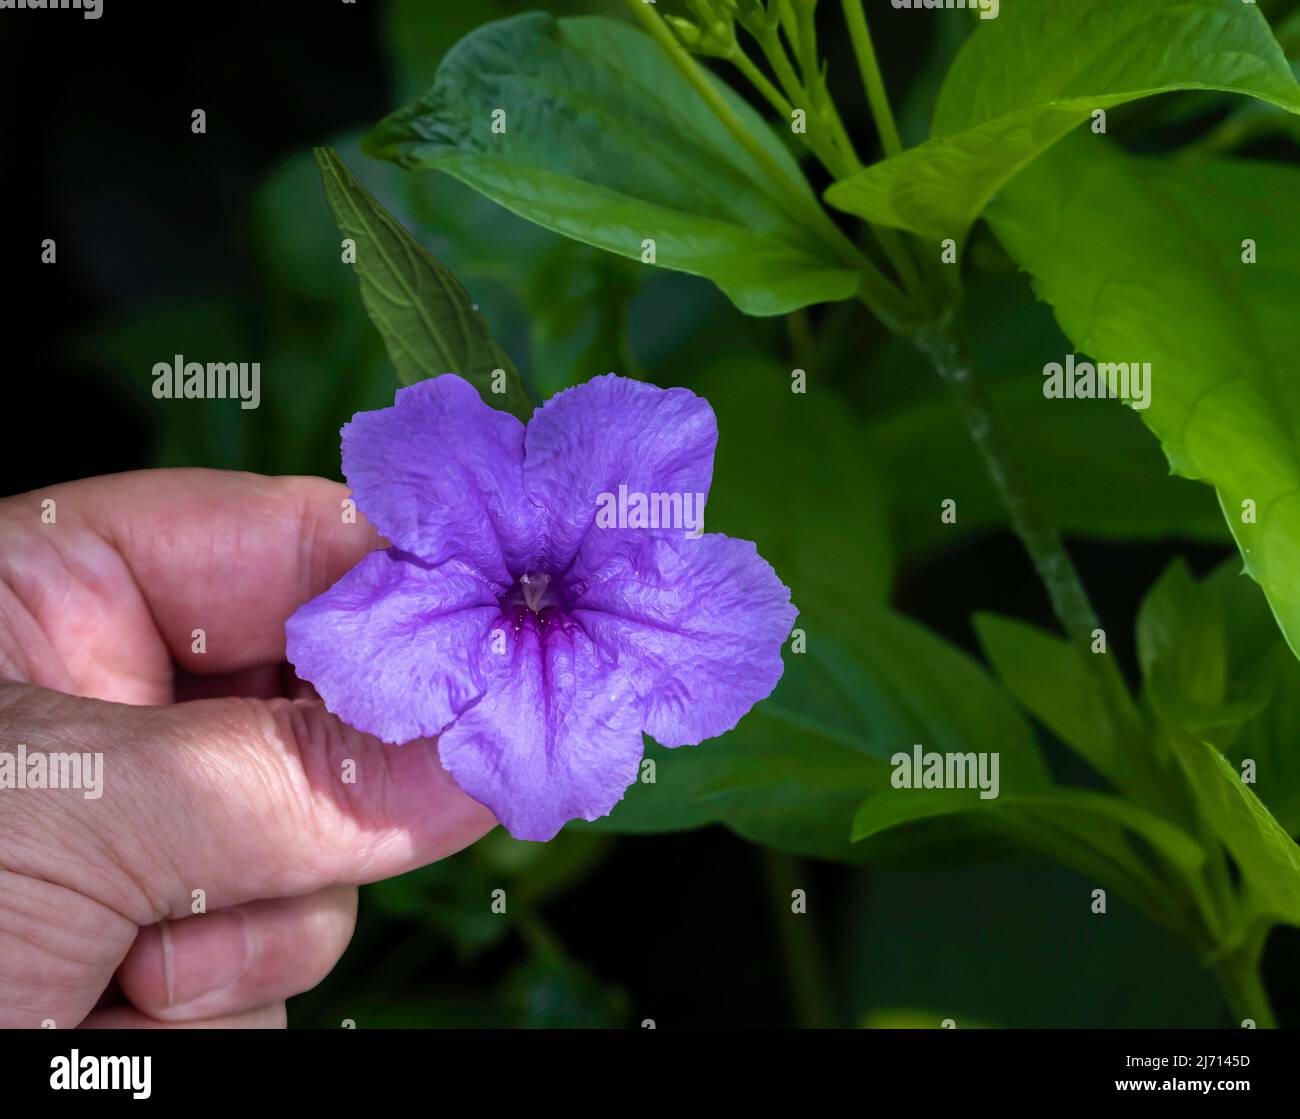 Fingers holding a tropical purple flower with lush green leaves on black background. Copy space Stock Photo